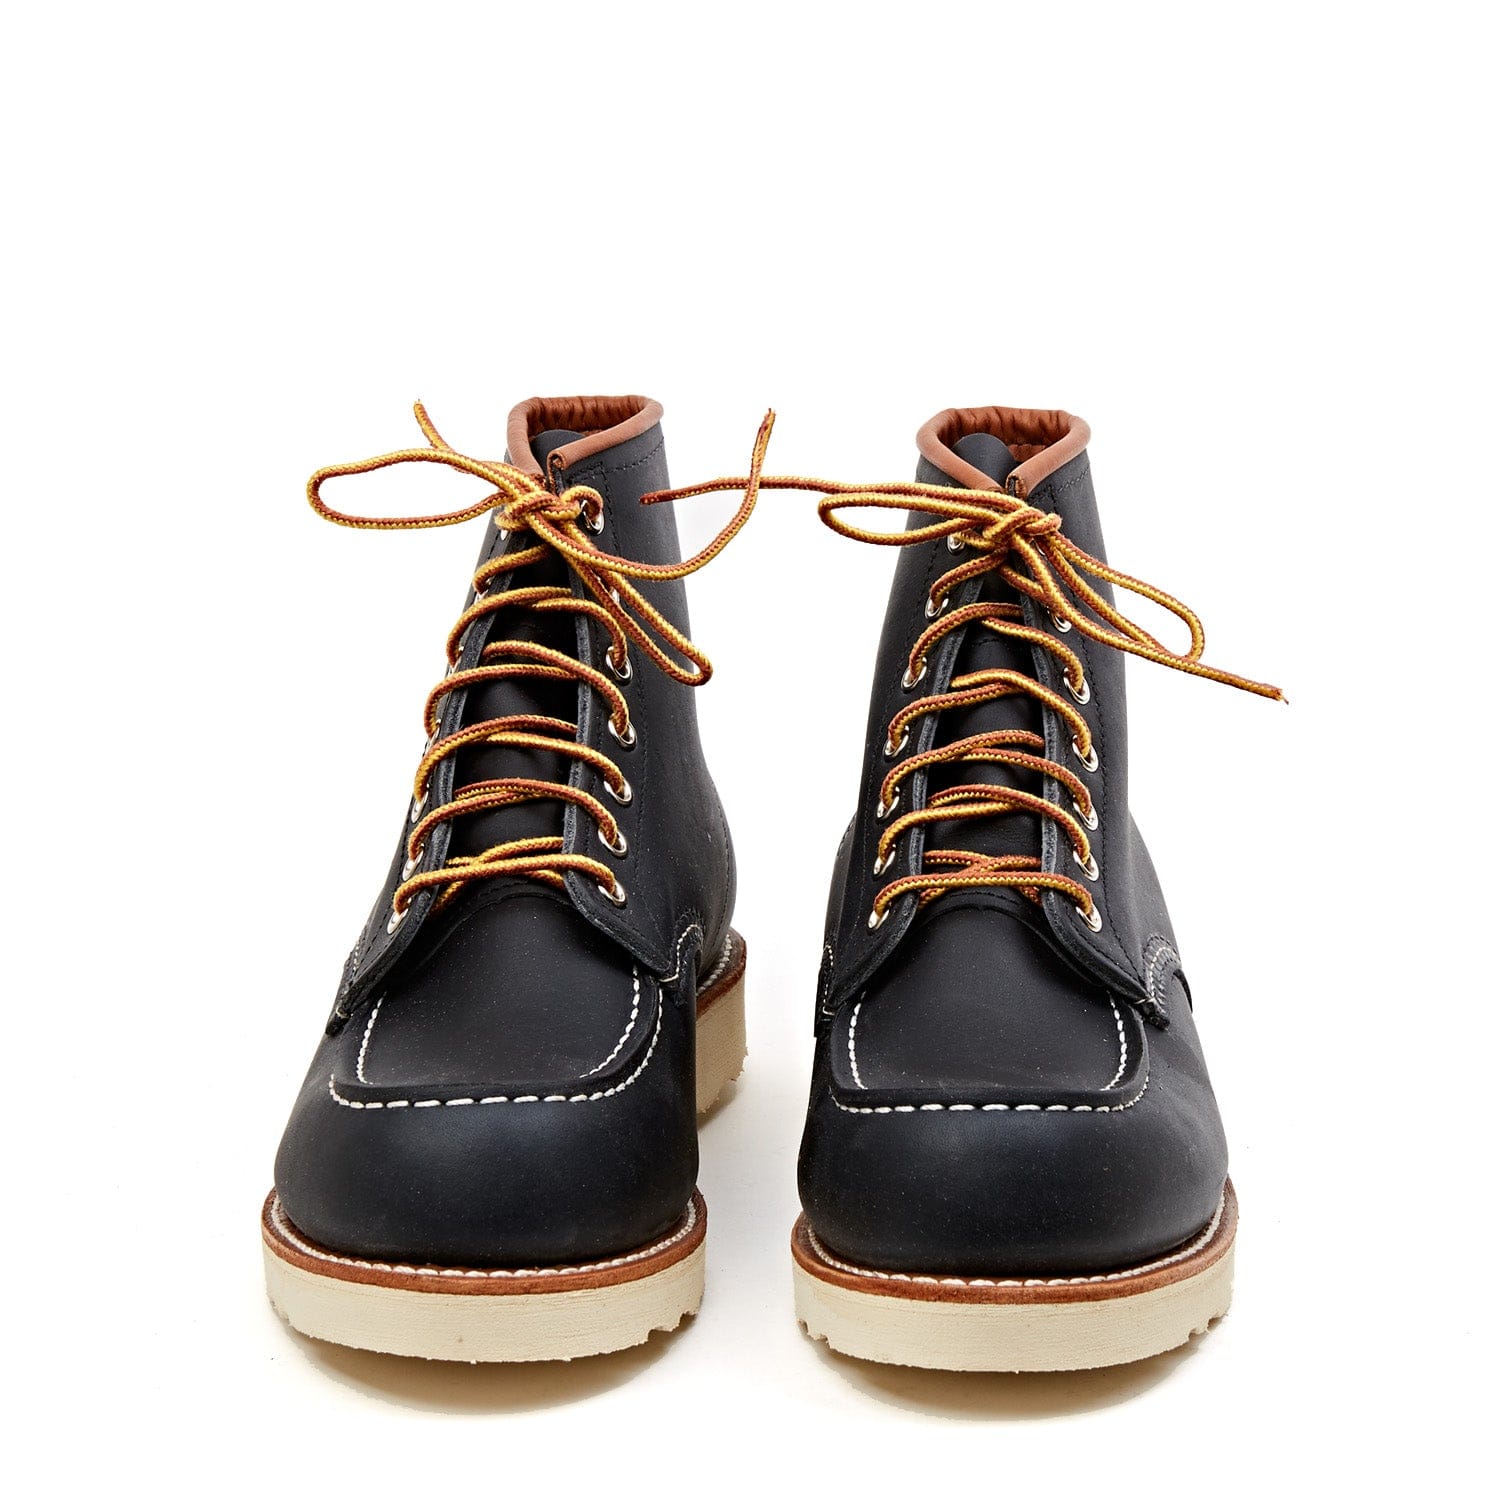 8859 Classic Moc Toe Navy Portage – Red Wing